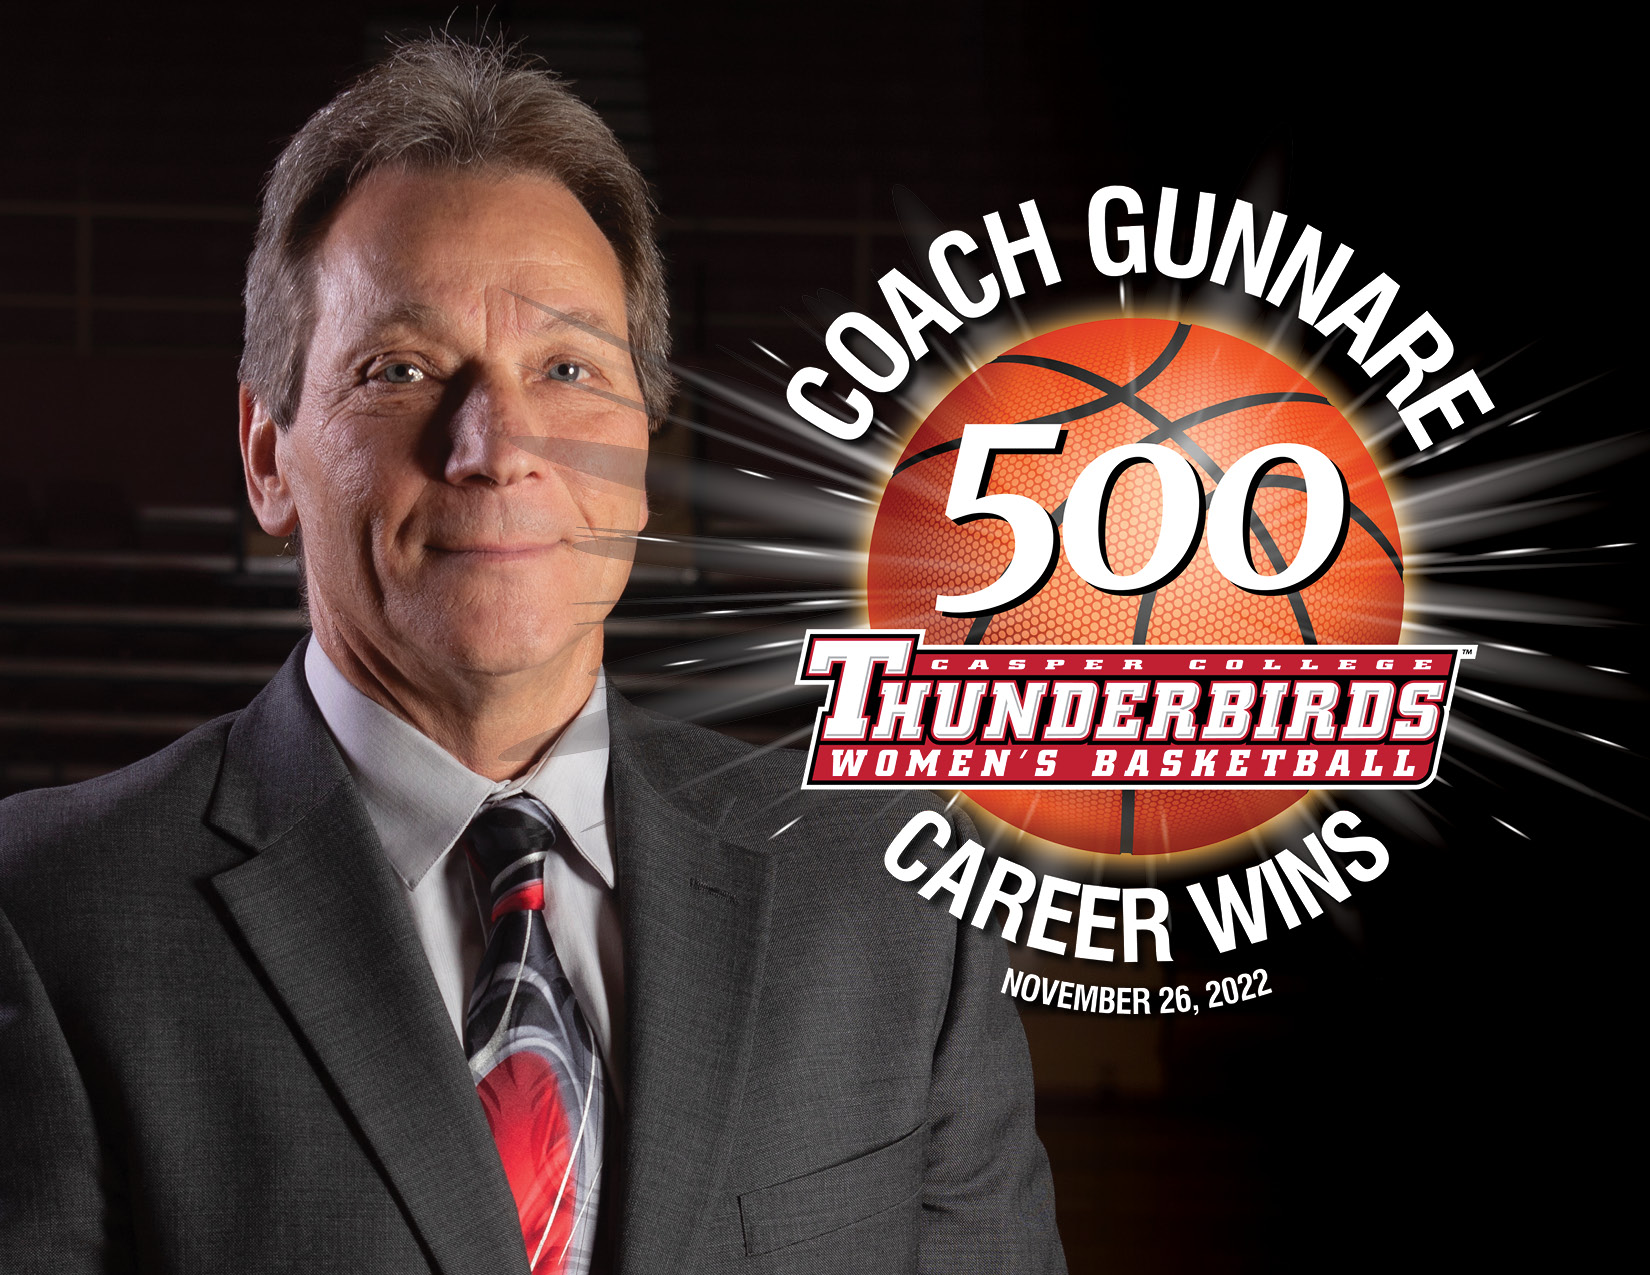 Image for Dwight Gunnare 500th win story.